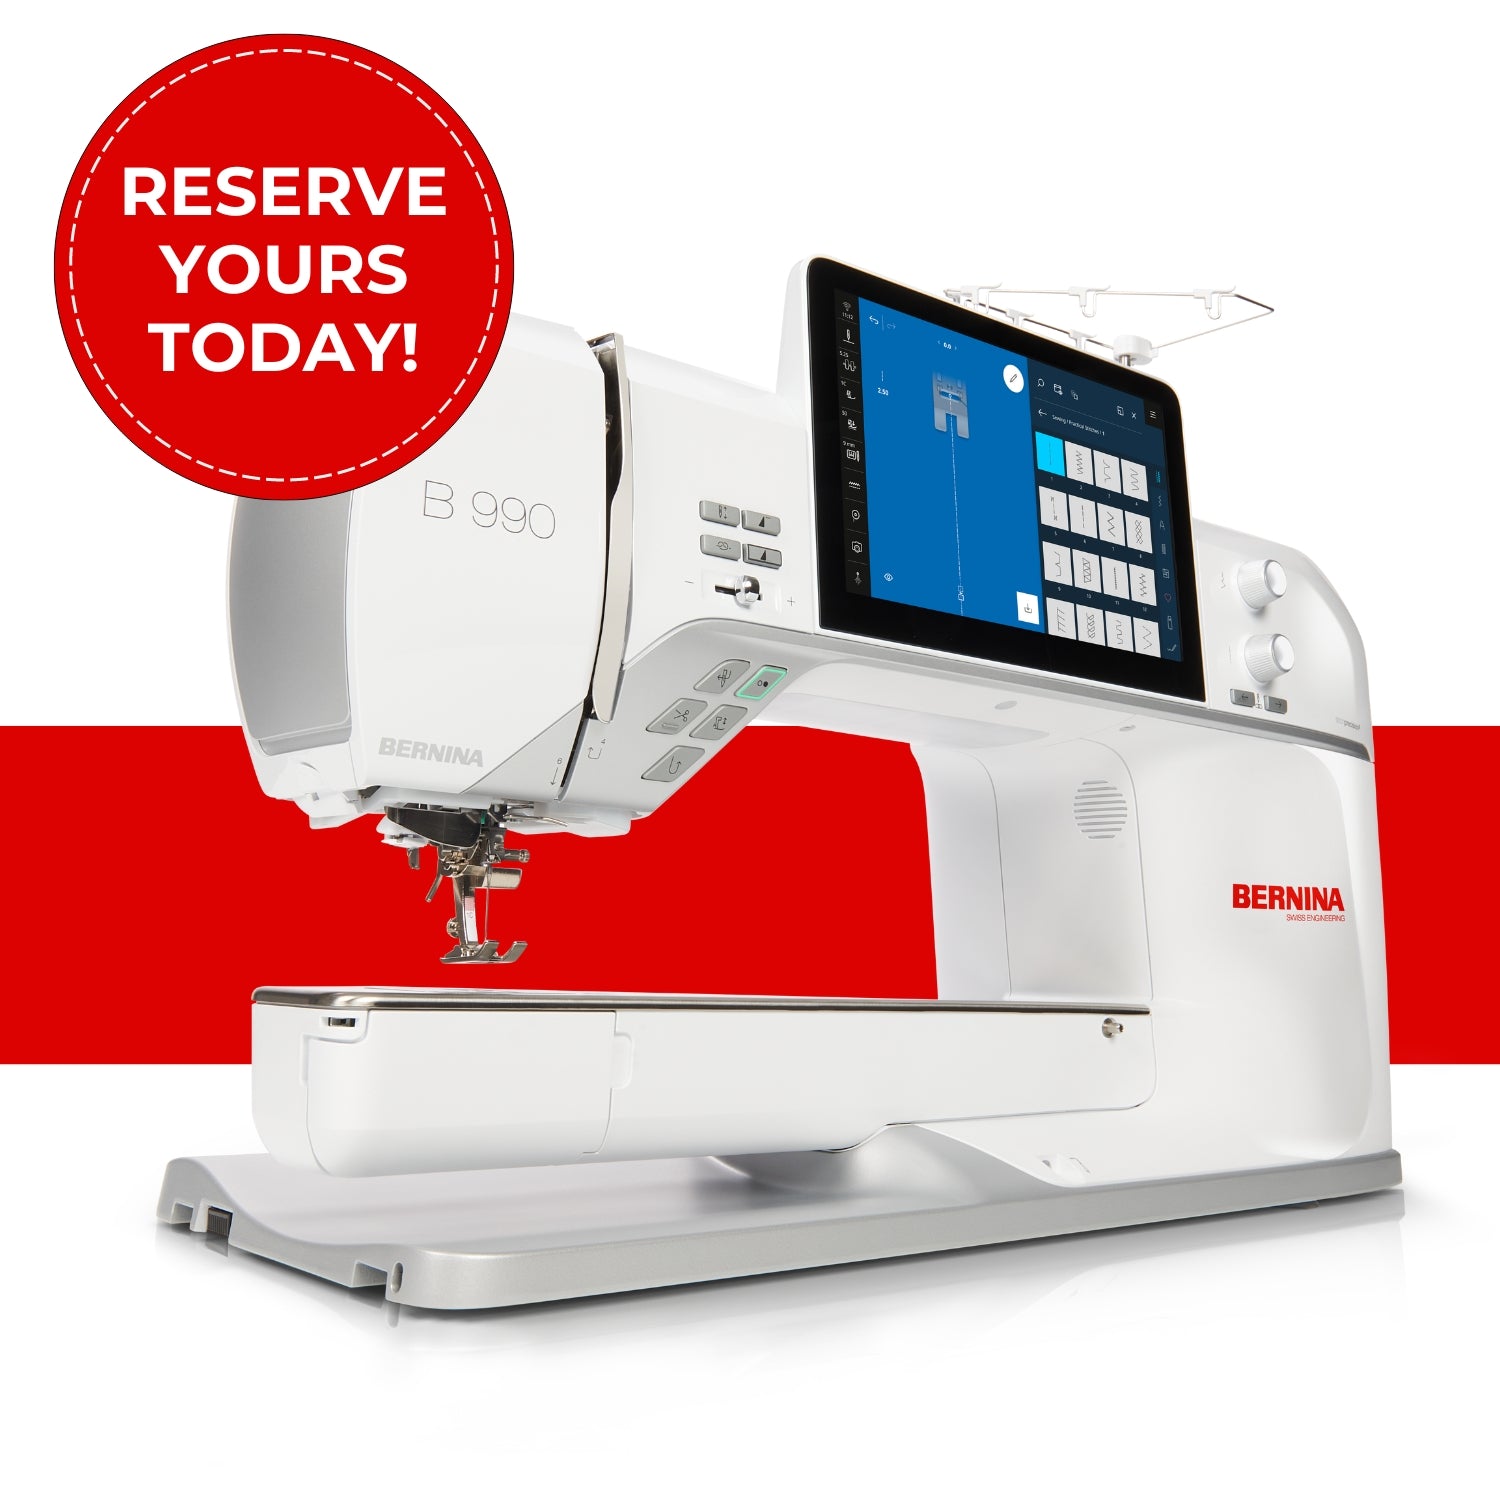 RESERVE YOUR NEW B990 Sewing Quilting Embroidery Machine